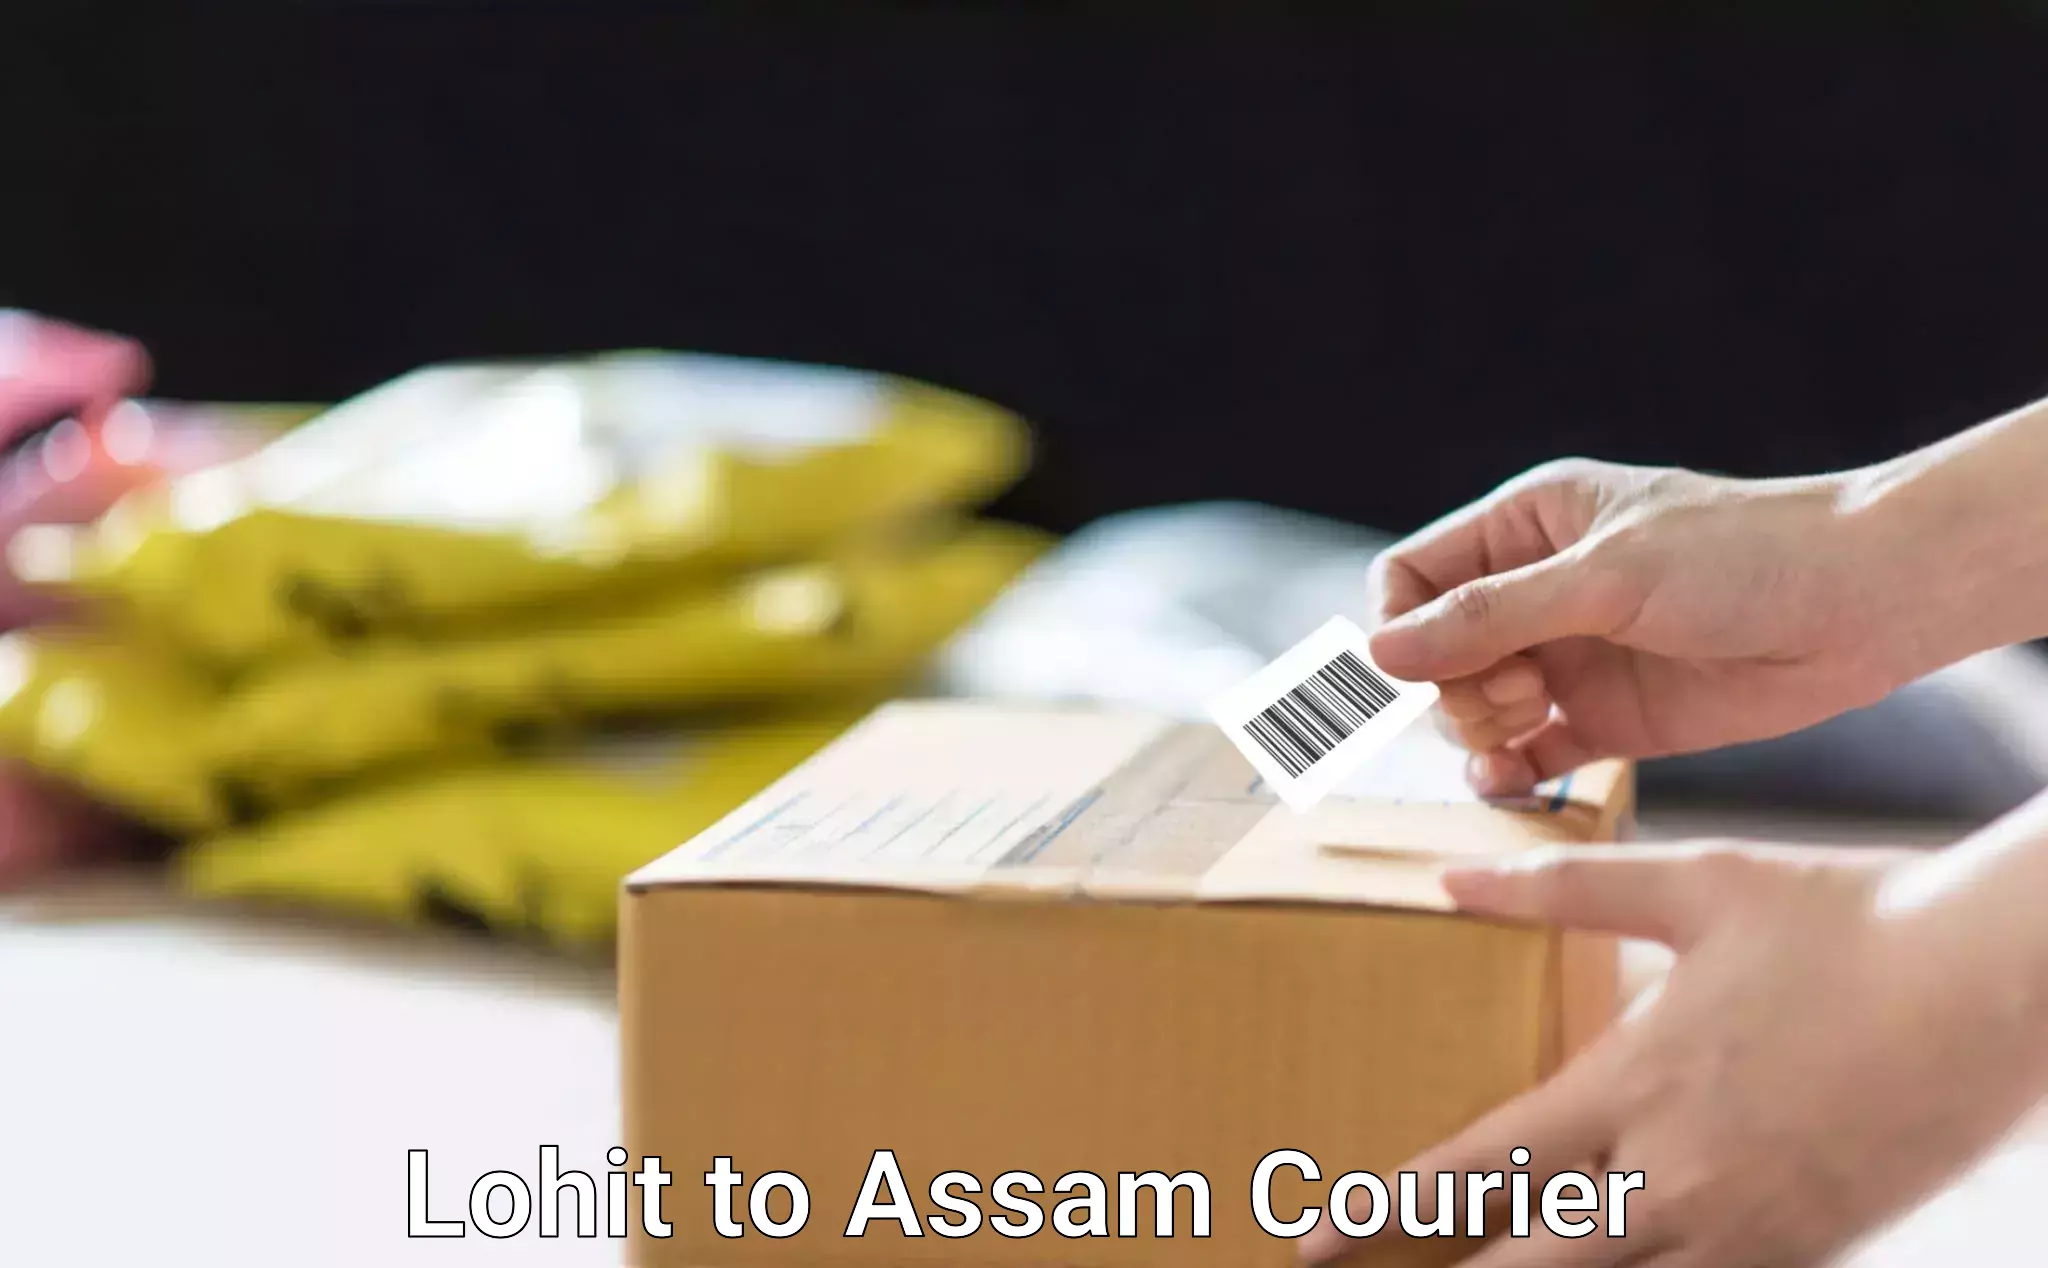 Cost-effective courier options Lohit to Hojai Lanka